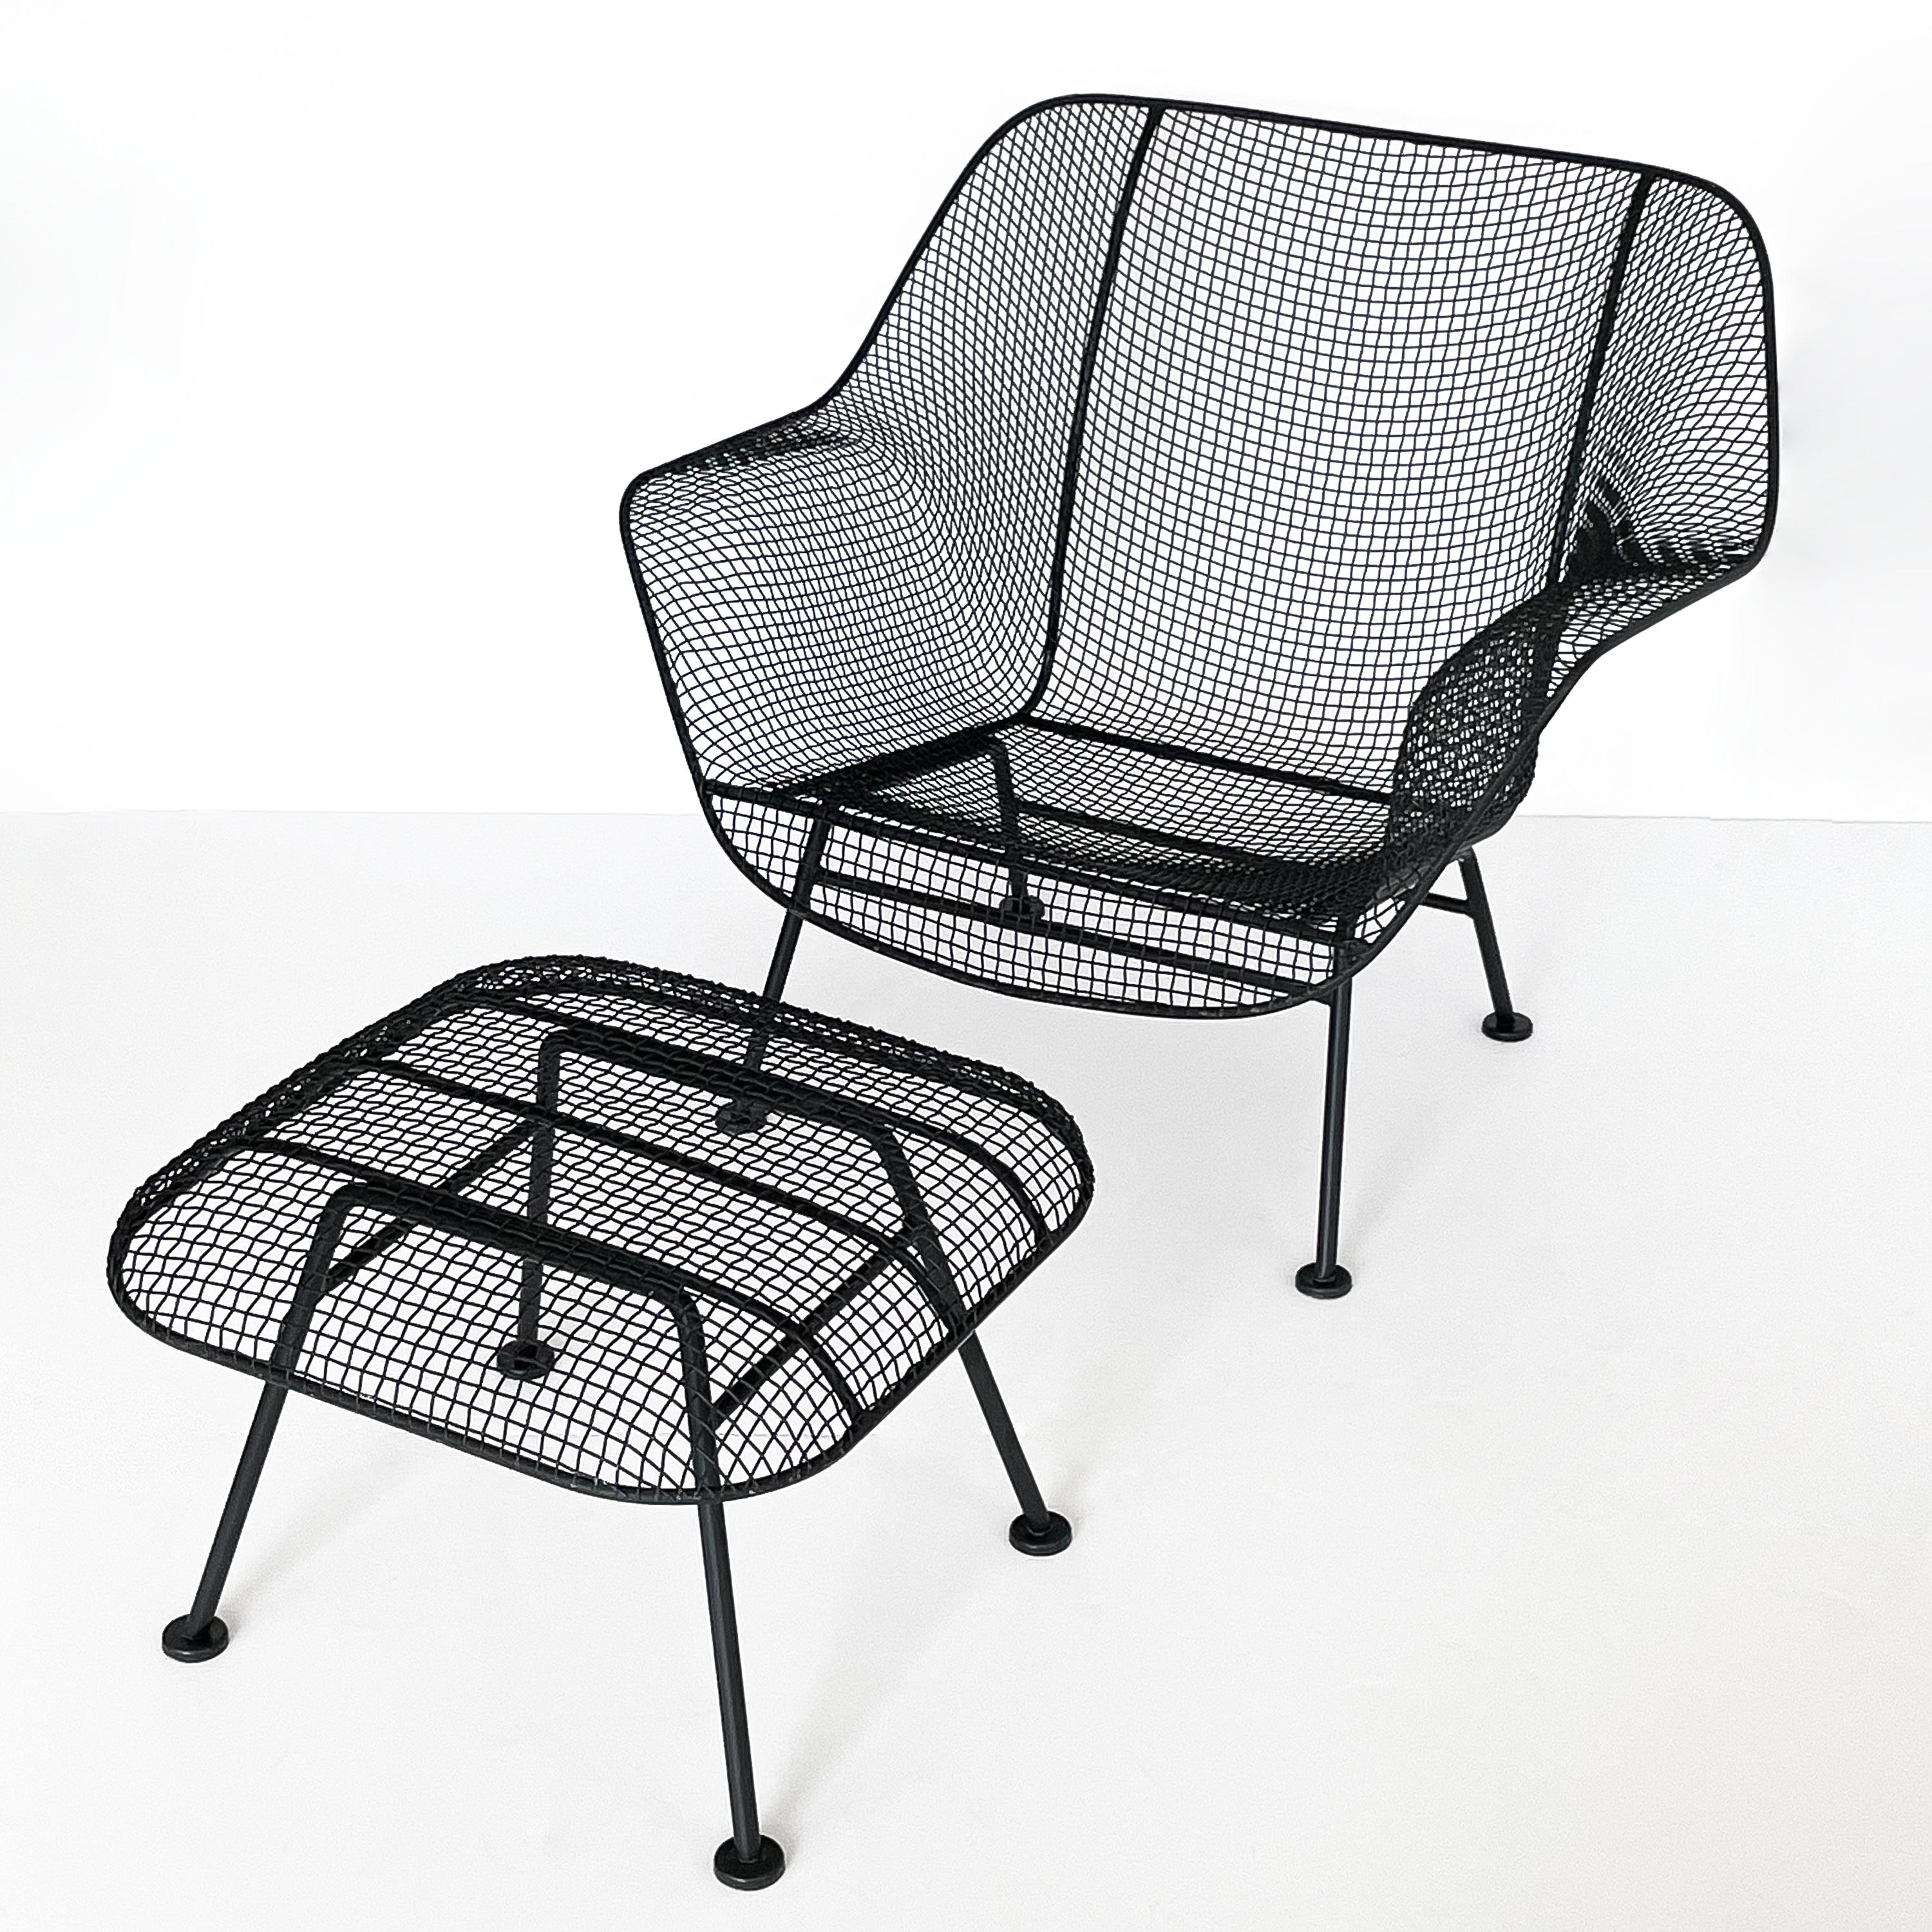 A large Woodard Sculptura wrought iron with steel mesh lounge chair and matching ottoman by Russell Woodard, circa 1960s. Originally designed in 1956 this example is estimated from the 1960s. Original satin black powder coated finish. Plastic foot